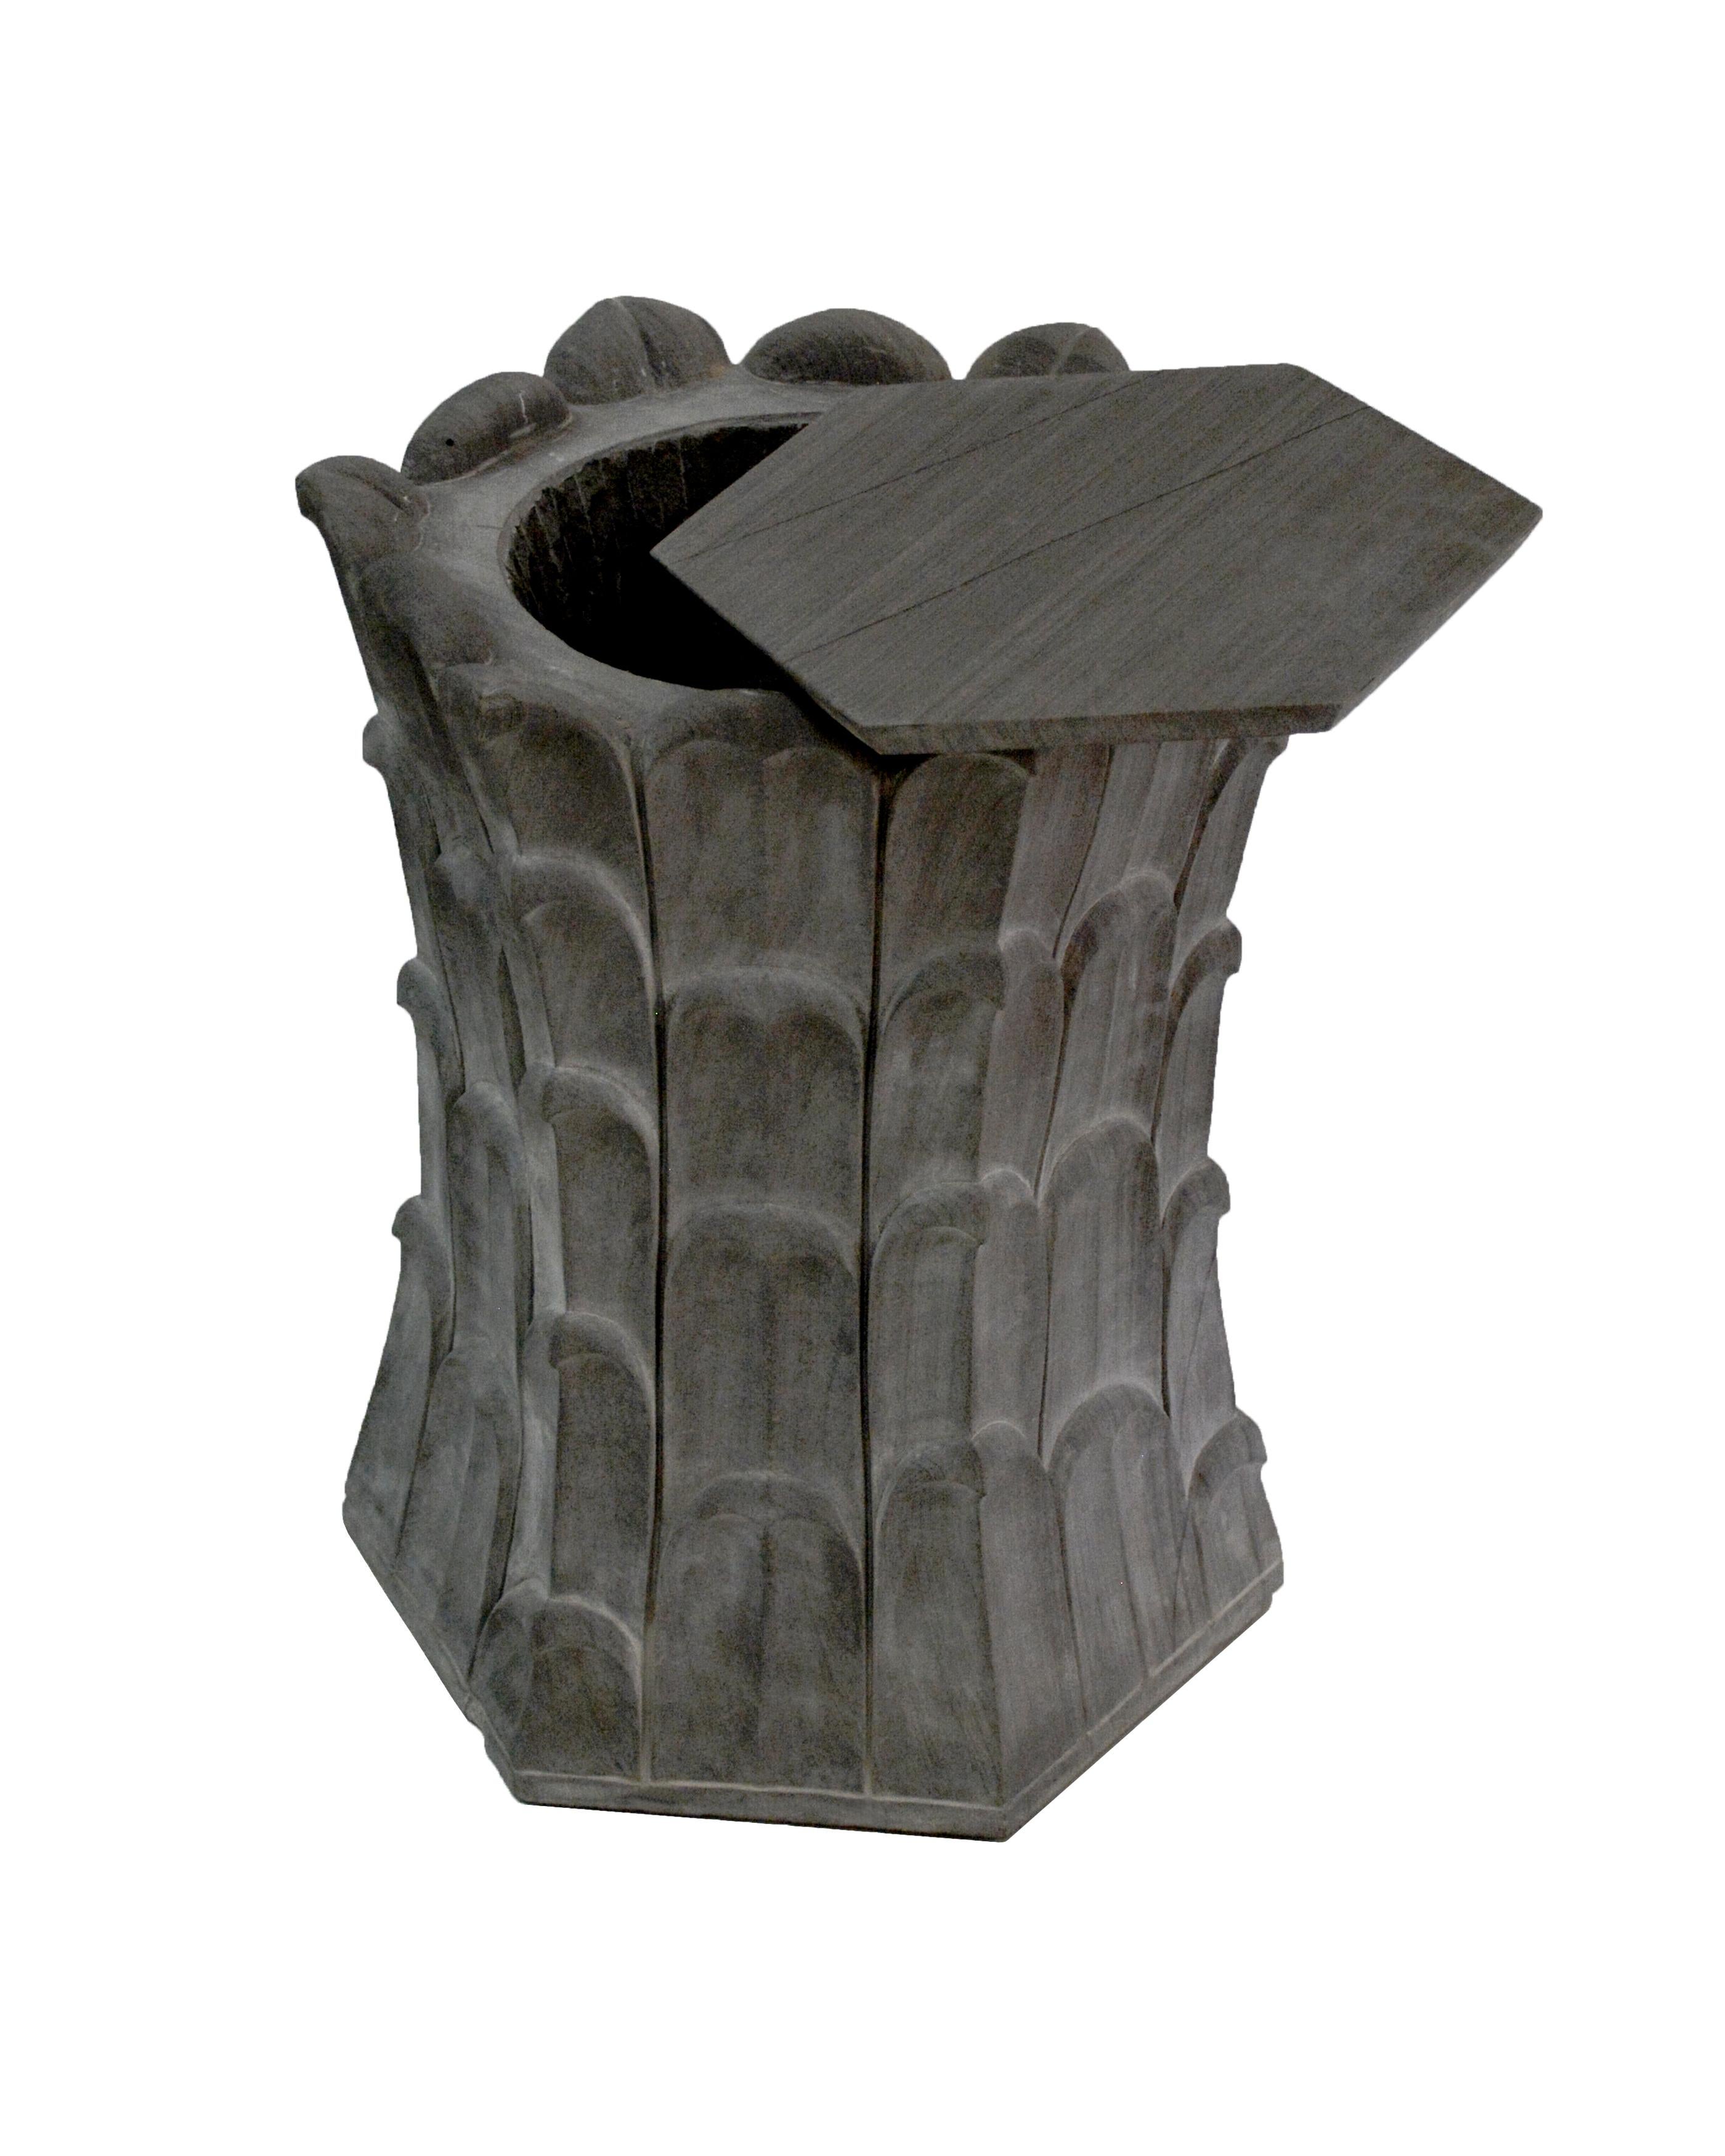 Inspired by the temple carvings in and around Udaipur, Stephanie Odegard designed this unique side table using locally available stones. The arrangement of the carved leaf motif gives an impression of a dense Bamboo Grove.

Bamboo Grove marble